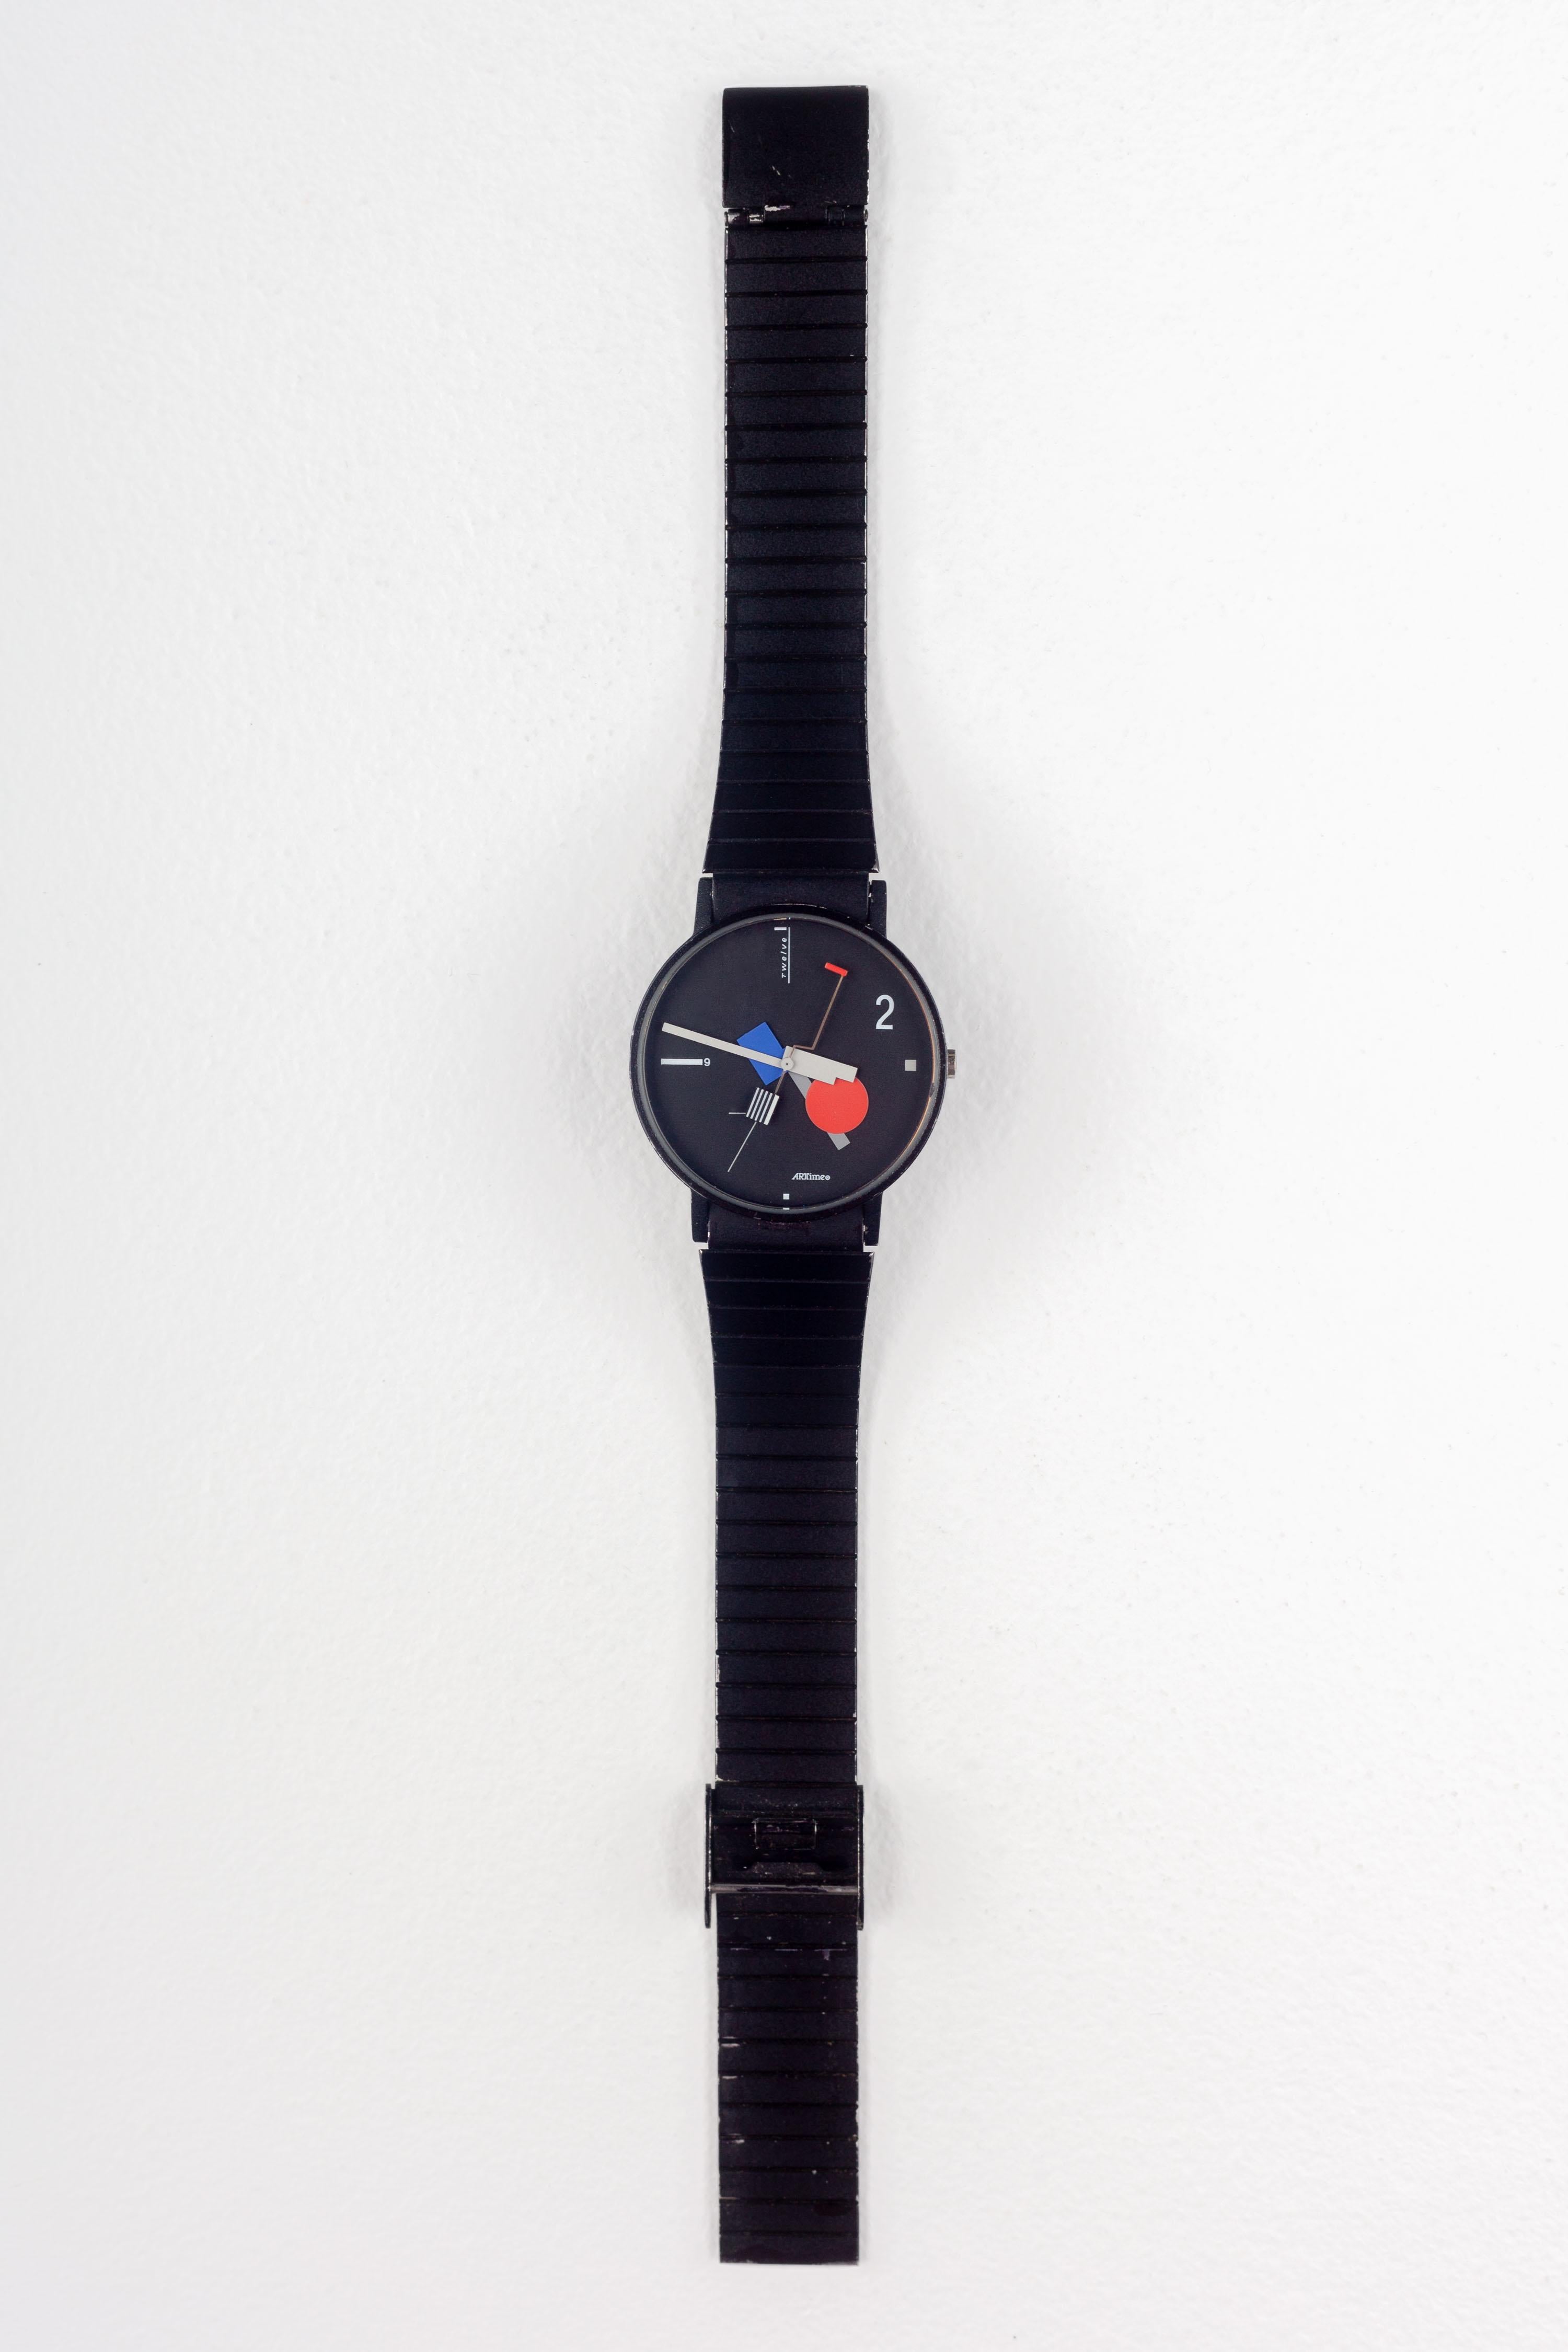 Late 20th Century Memphis Postmodern Wristwatch by Nicolai Canetti for Artime, 1986 Swiss made For Sale